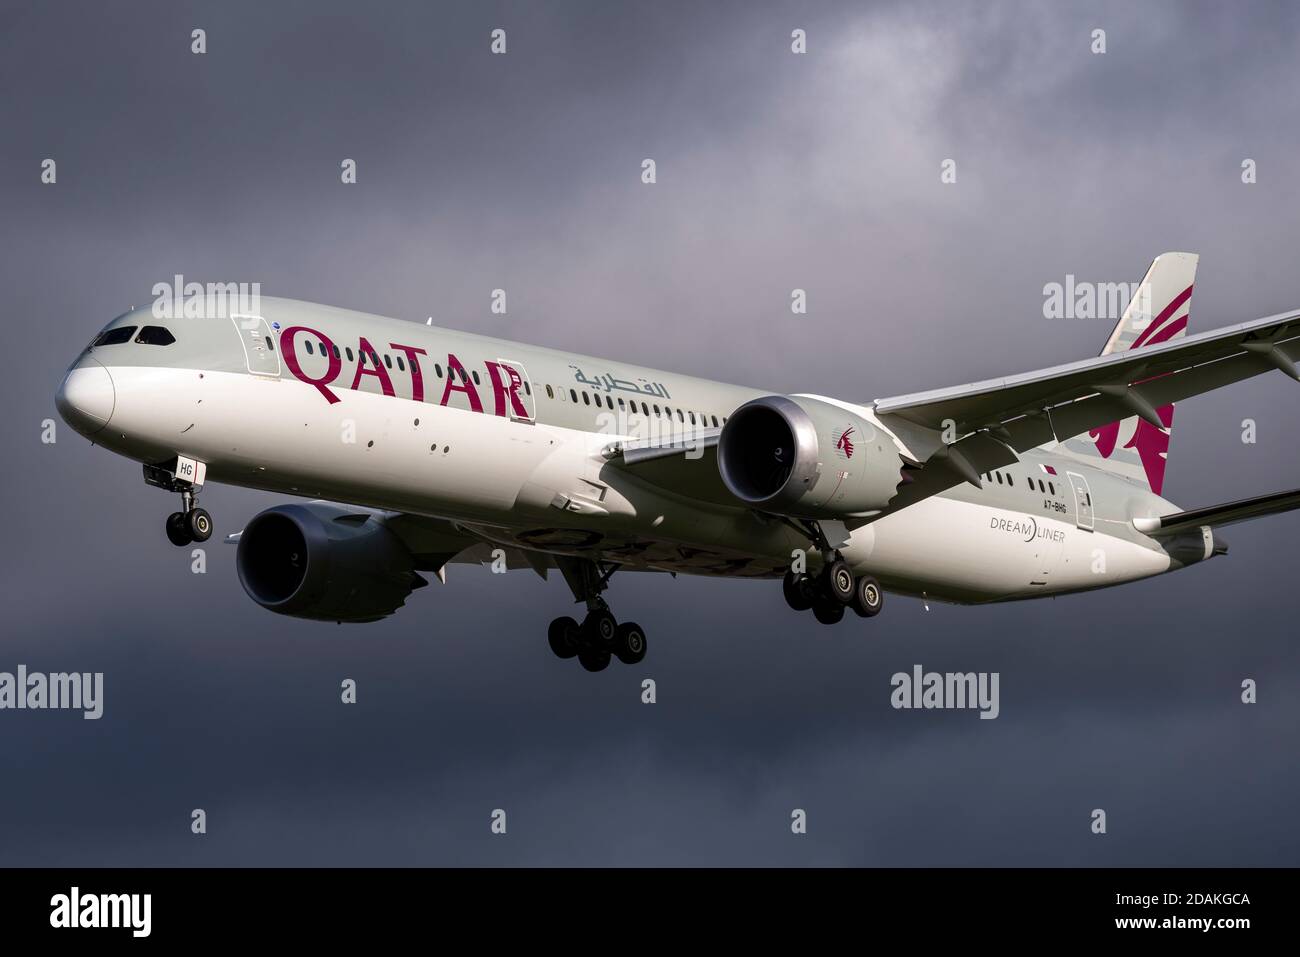 Qatar Airways Boeing 787 jet airliner plane A7-BHG on approach to land at London Heathrow Airport, UK, during the second national COVID 19 lockdown Stock Photo